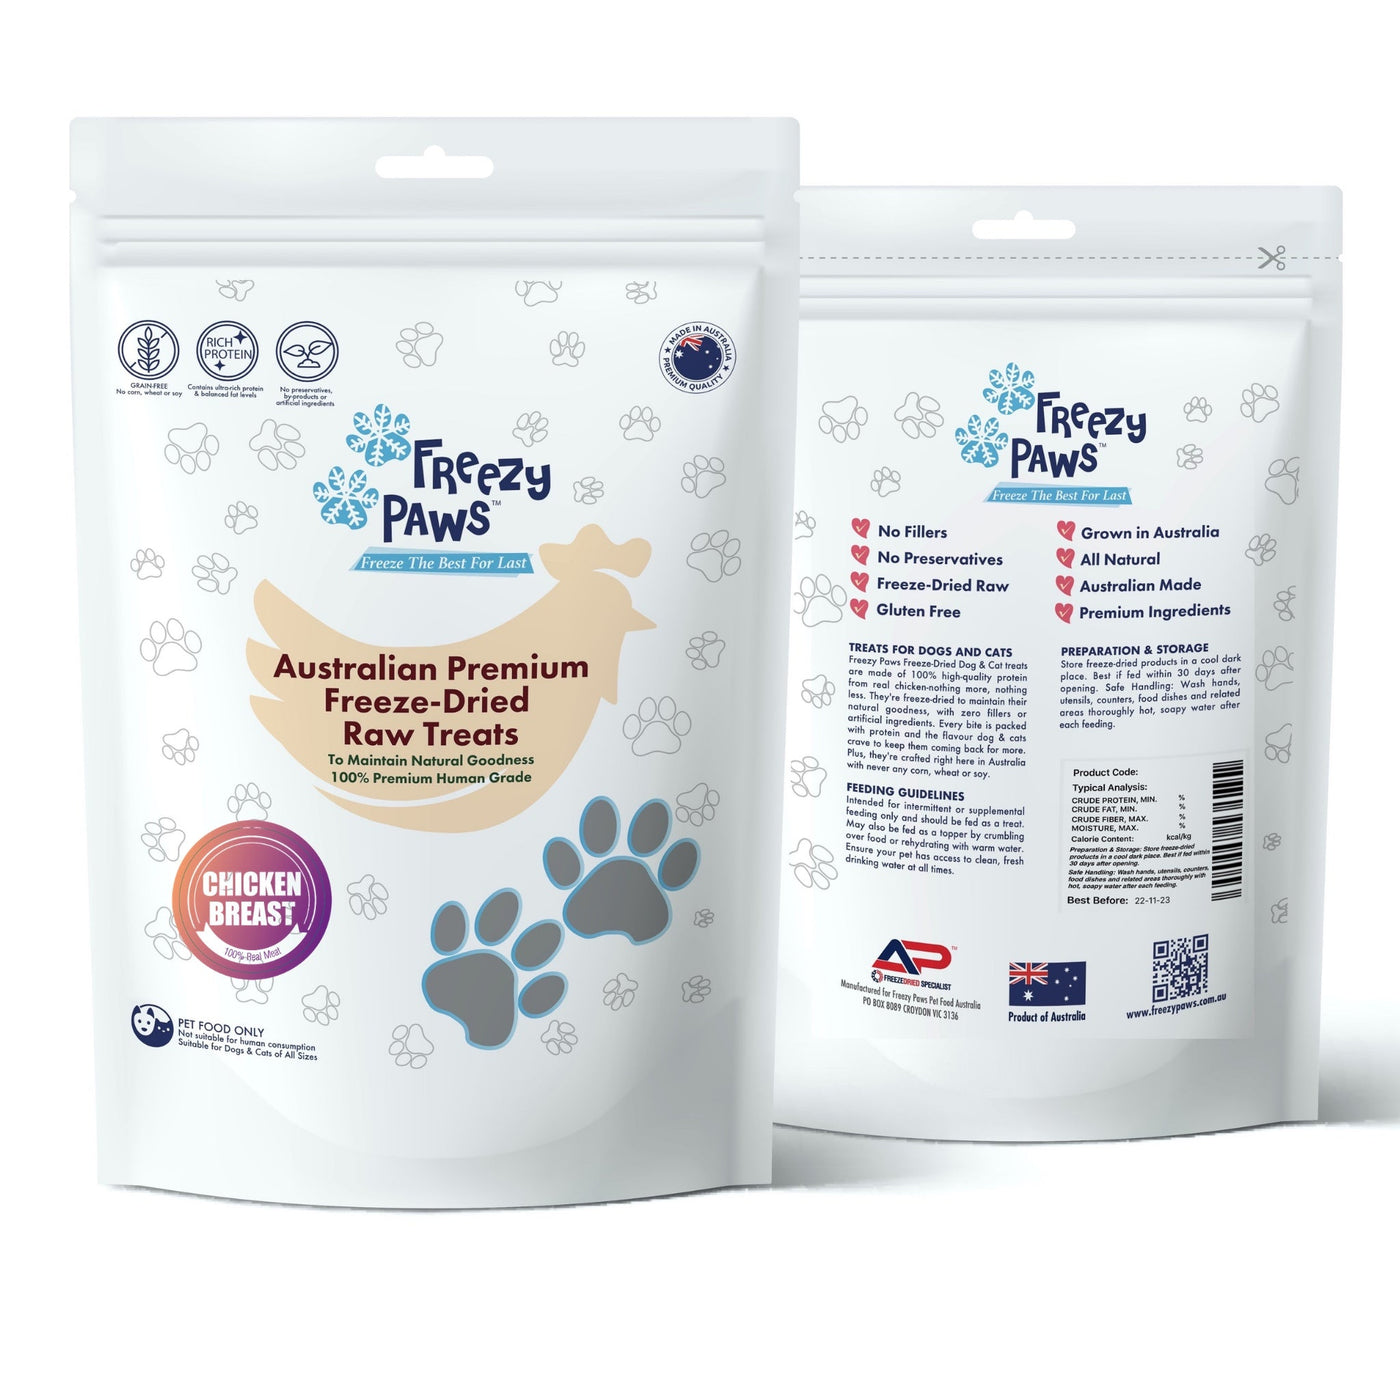 Freezy Paws Freeze Dried Chicken Breast Dog And Cat Treats 100g